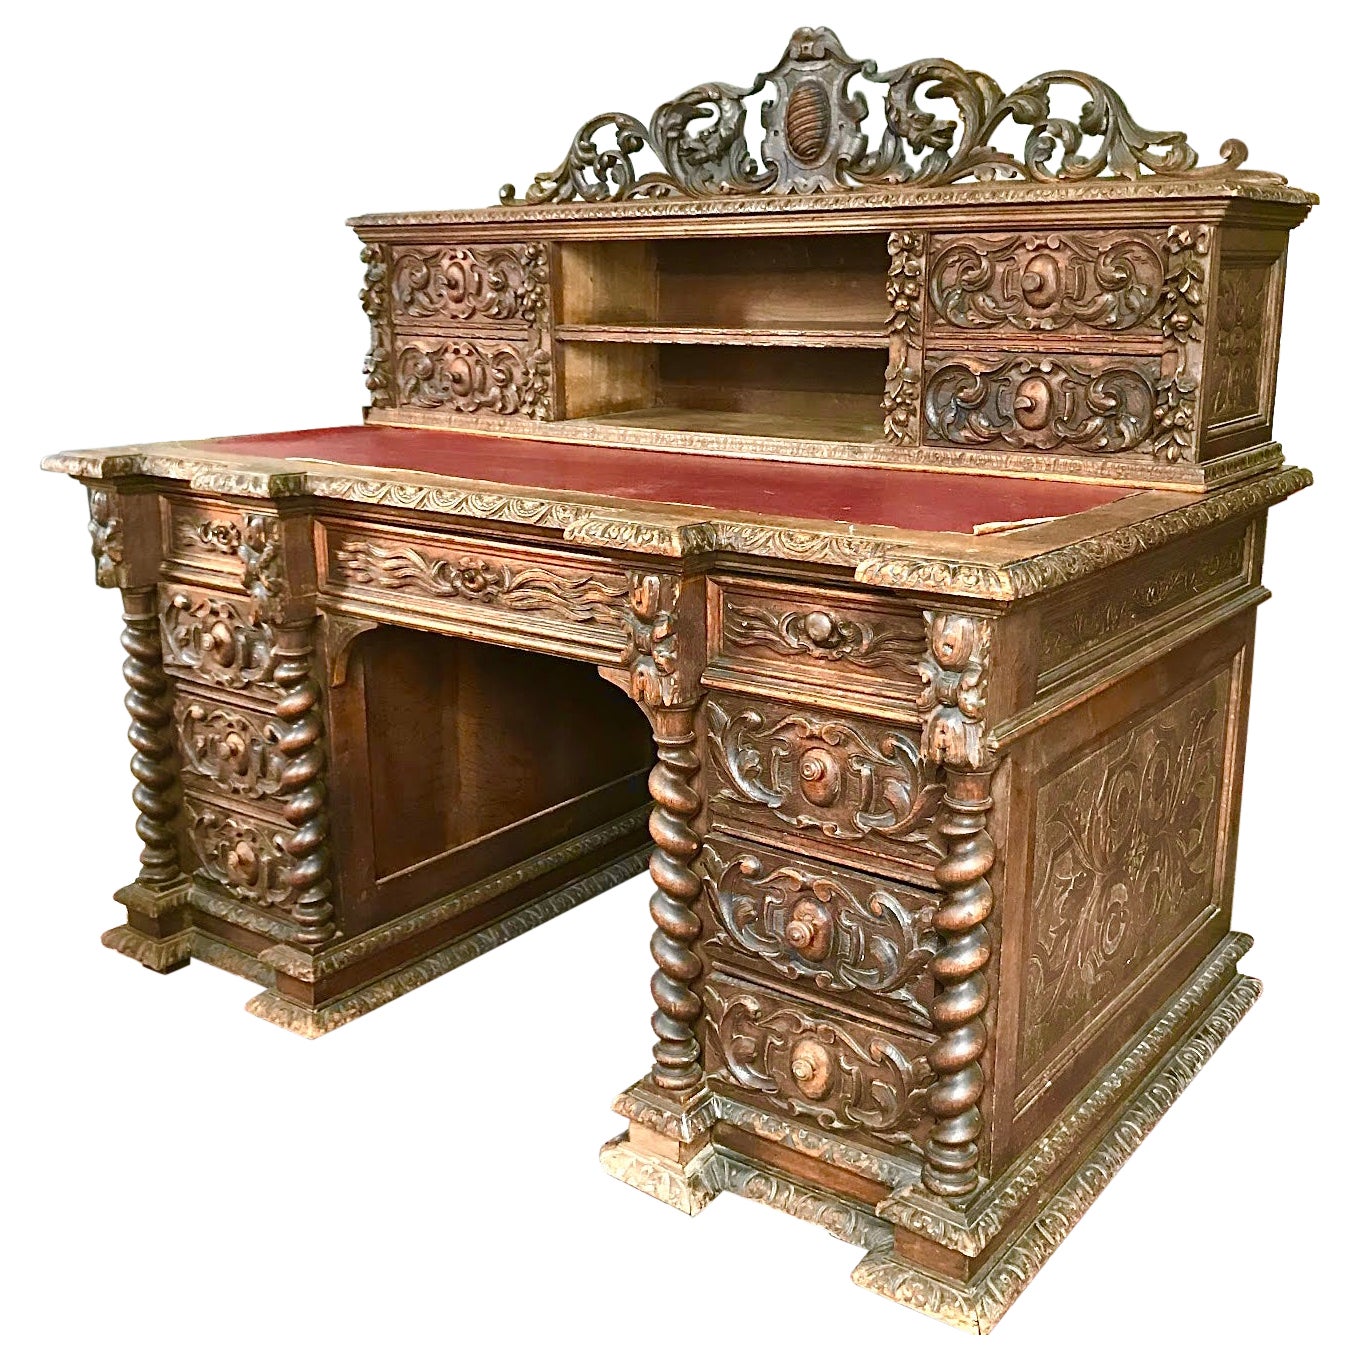 French Neo-Renaissance Hand-Carved Wooden Desk Henri II Style circa 1870 France